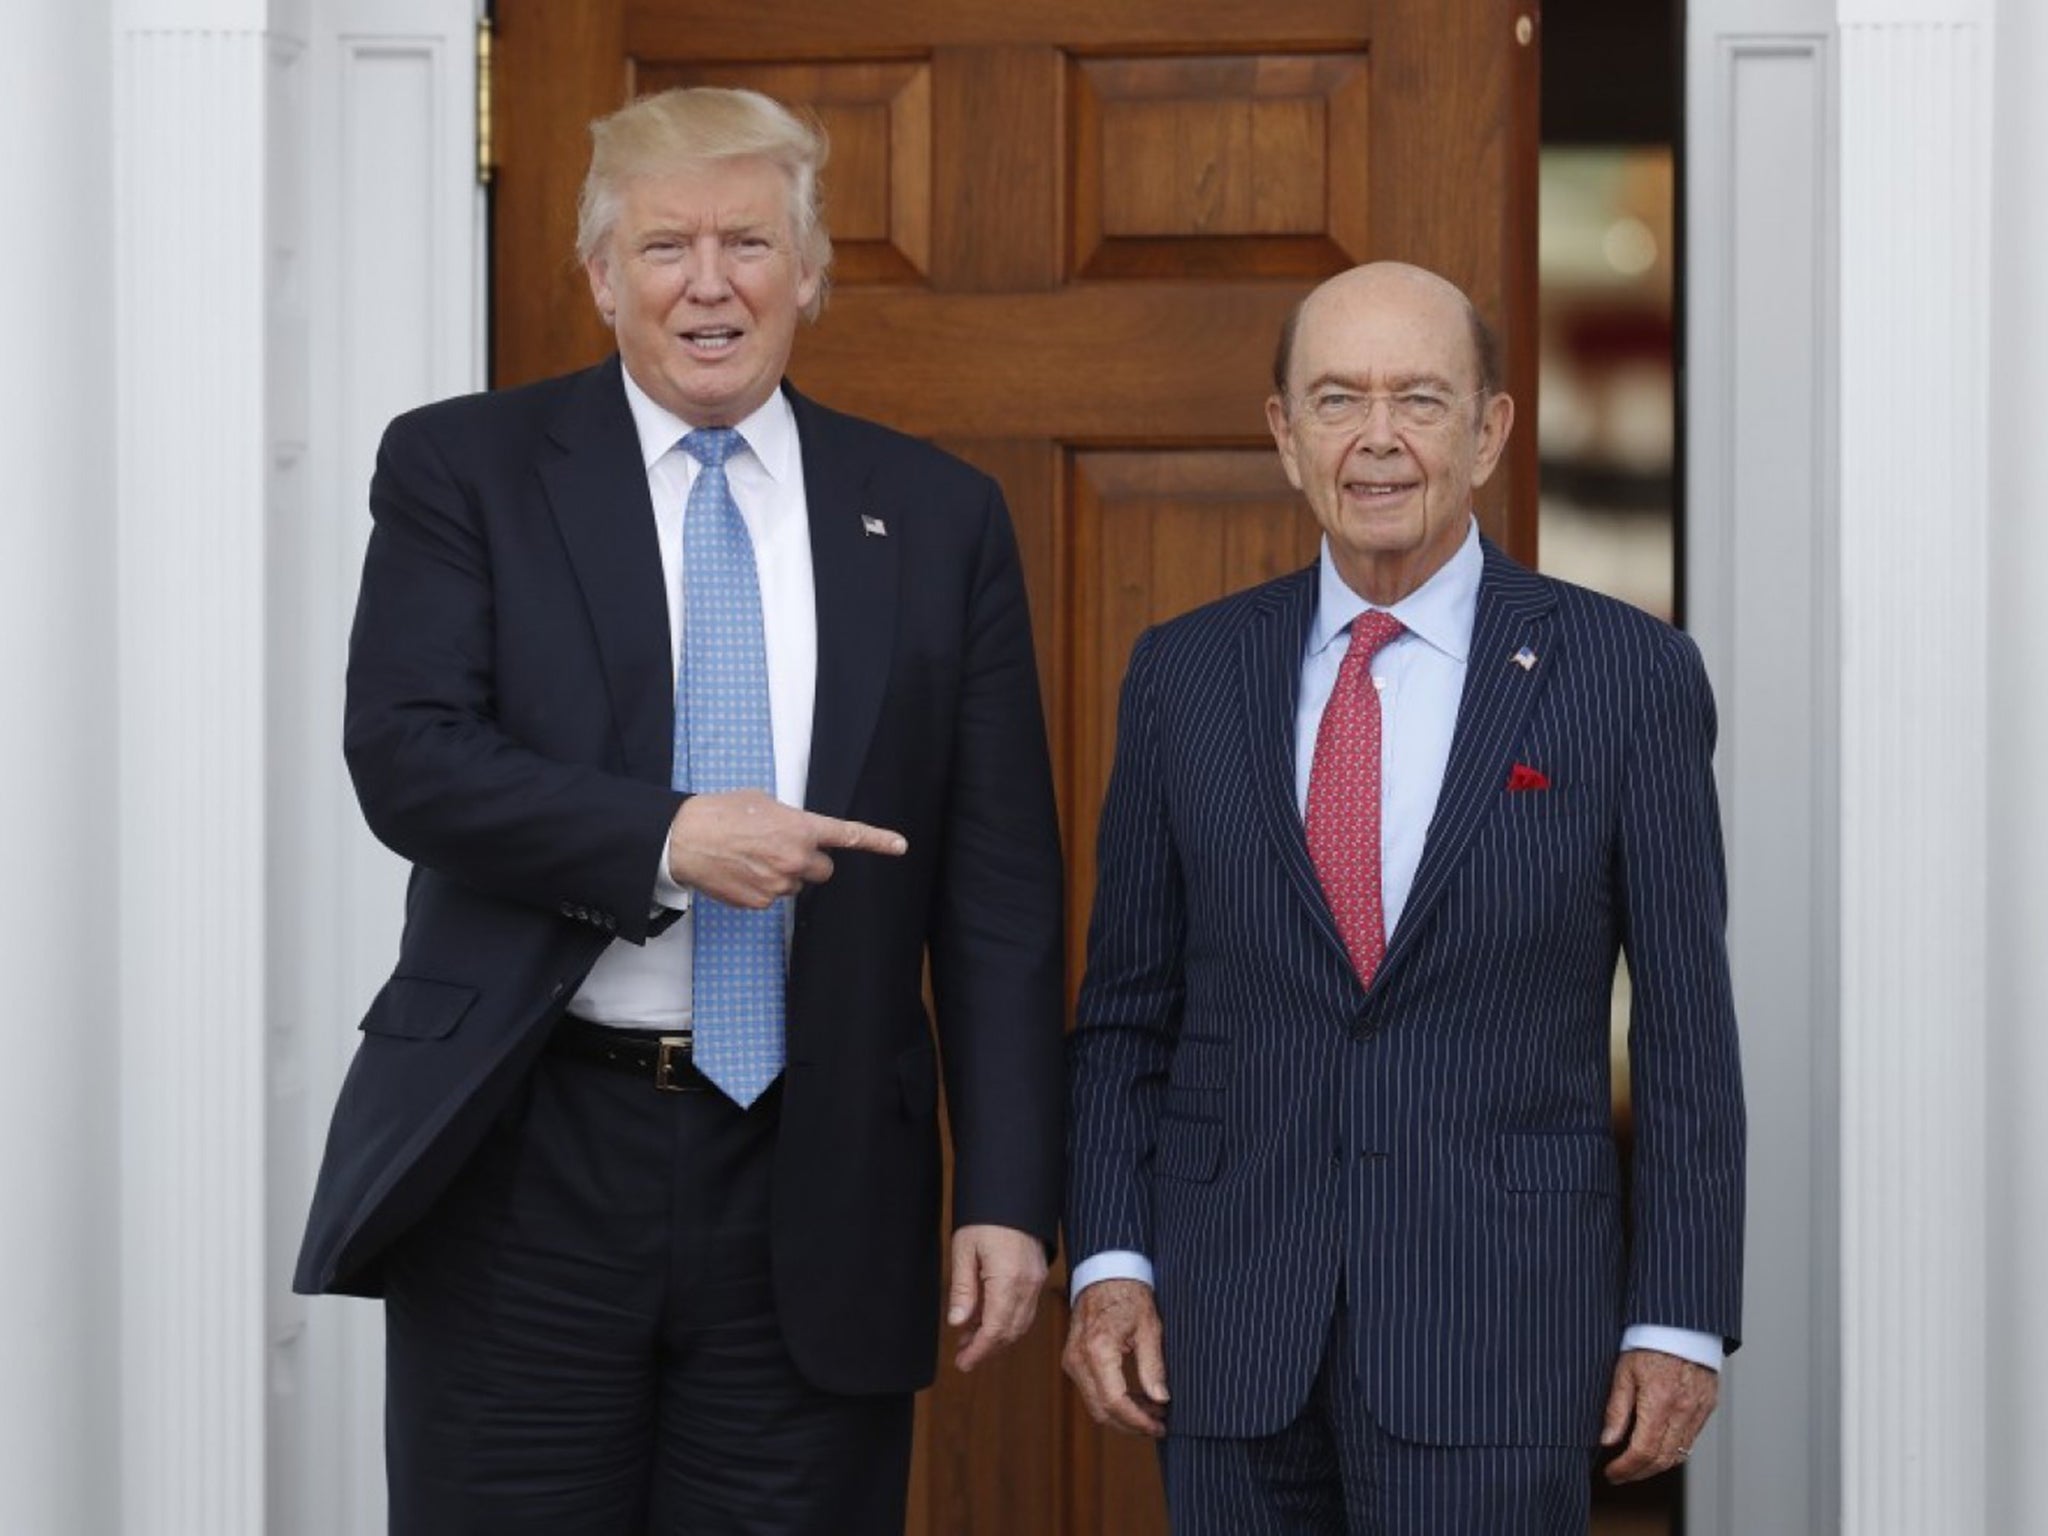 President-elect Donald Trump, seen here with investor Wilbur Ross, is offering exclusive access to major backers